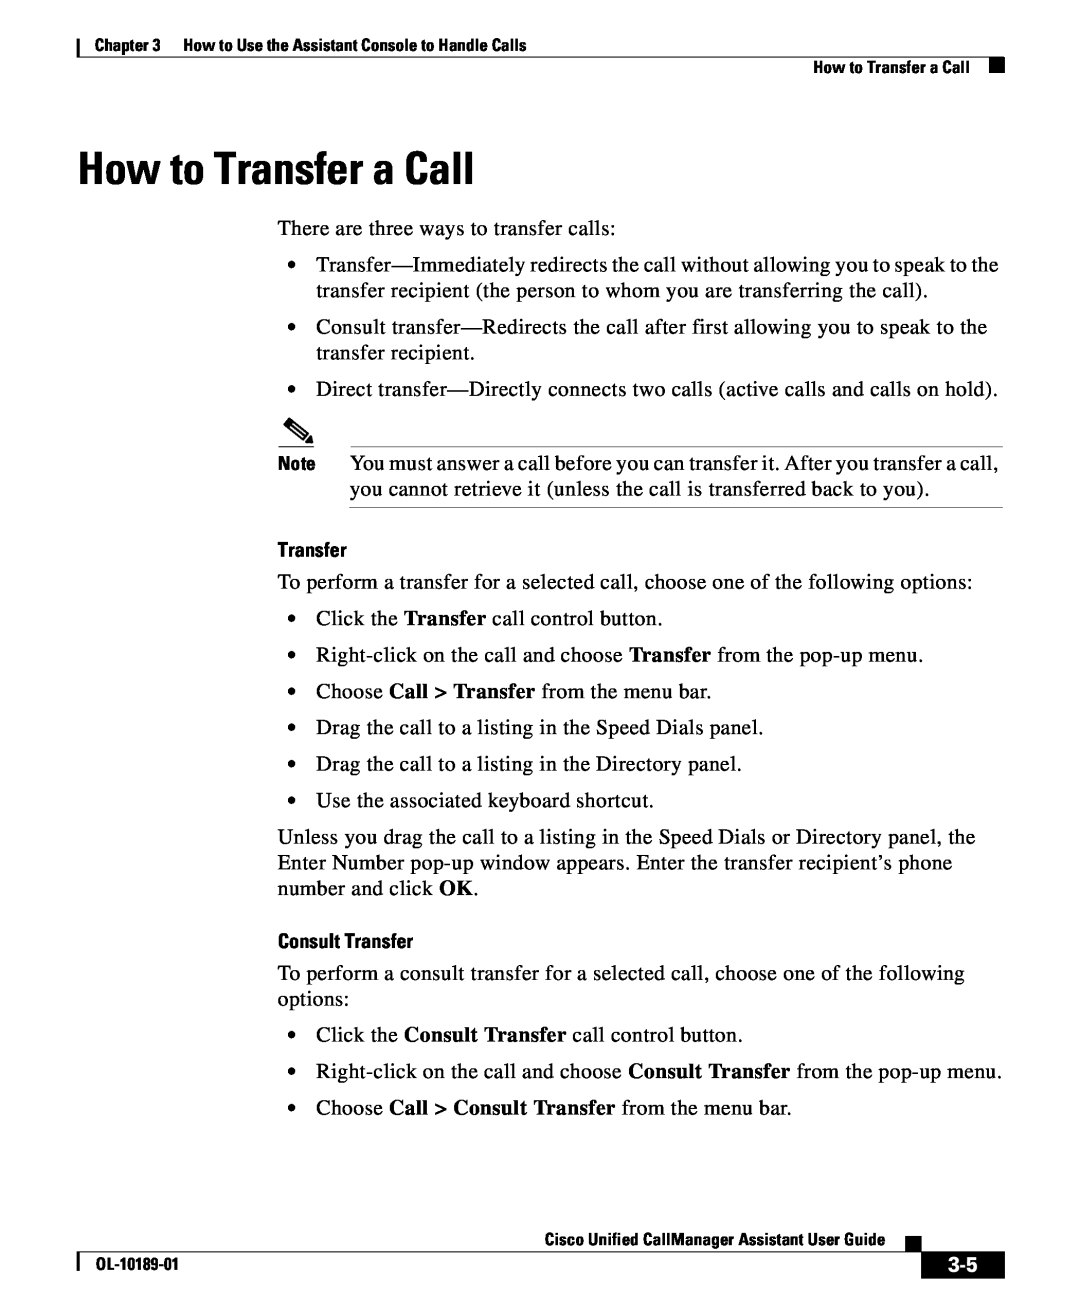 Cisco Systems OL-10189-01 manual How to Transfer a Call, Consult Transfer 